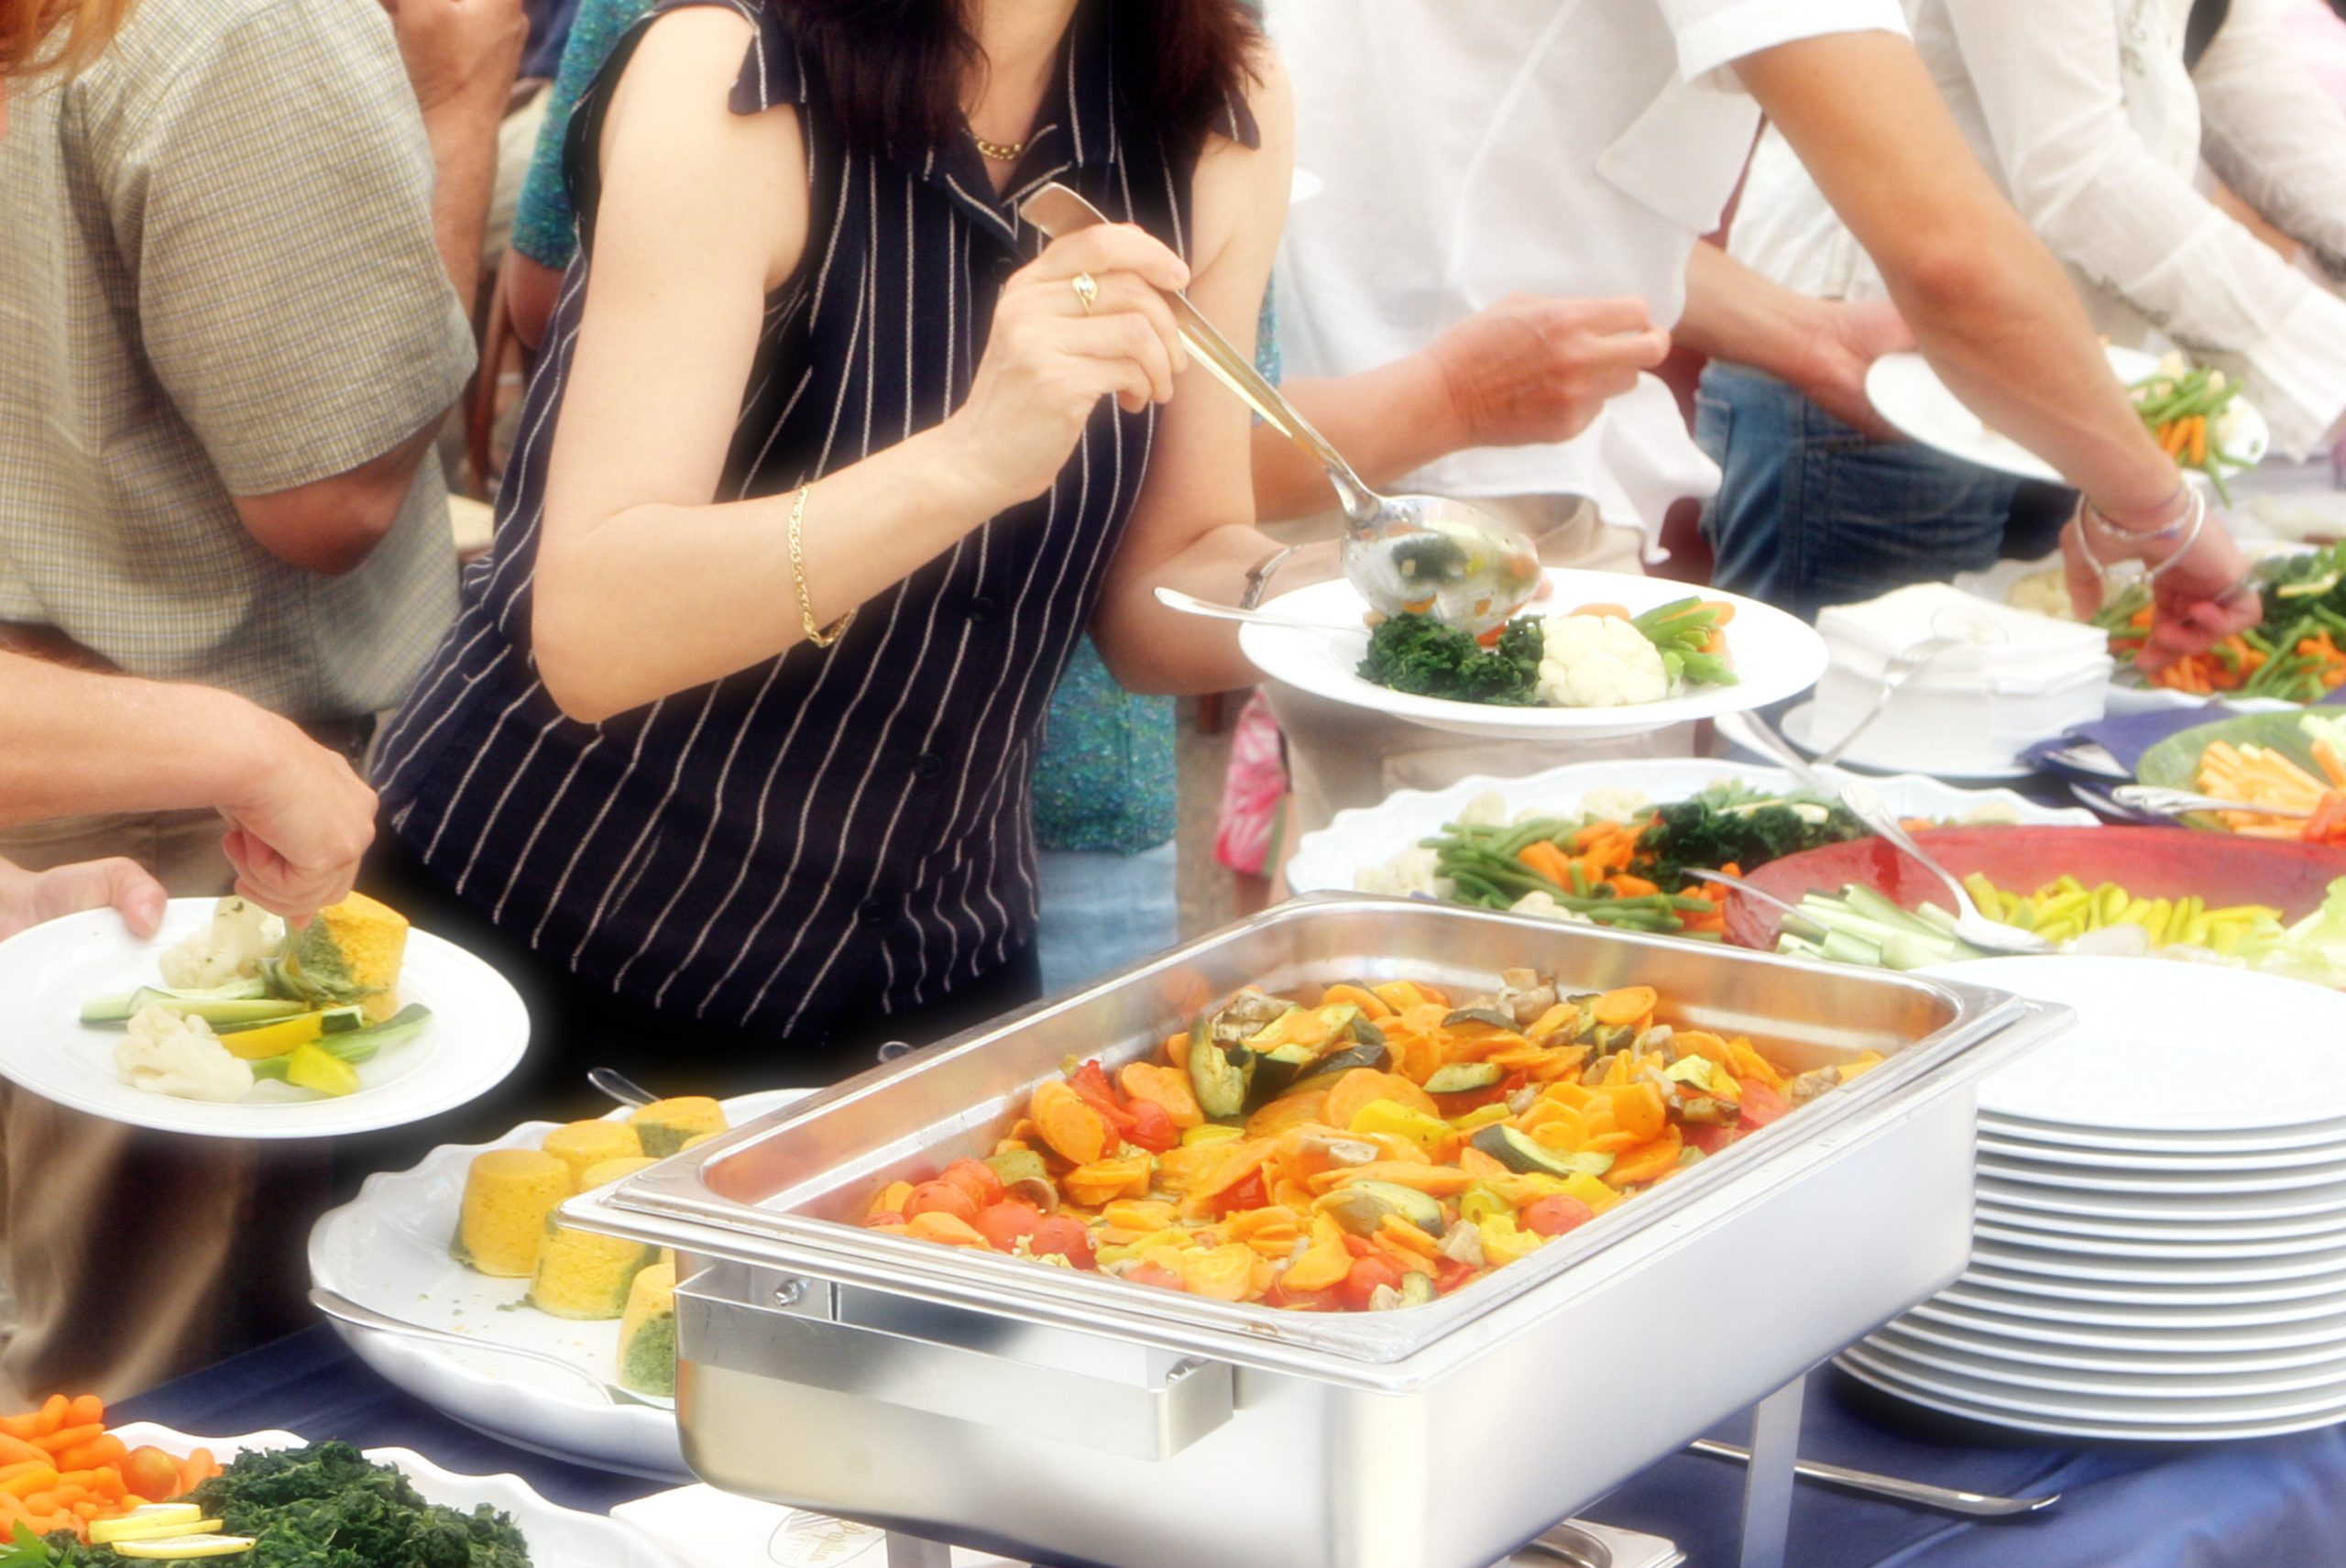 How to find reliable catering services